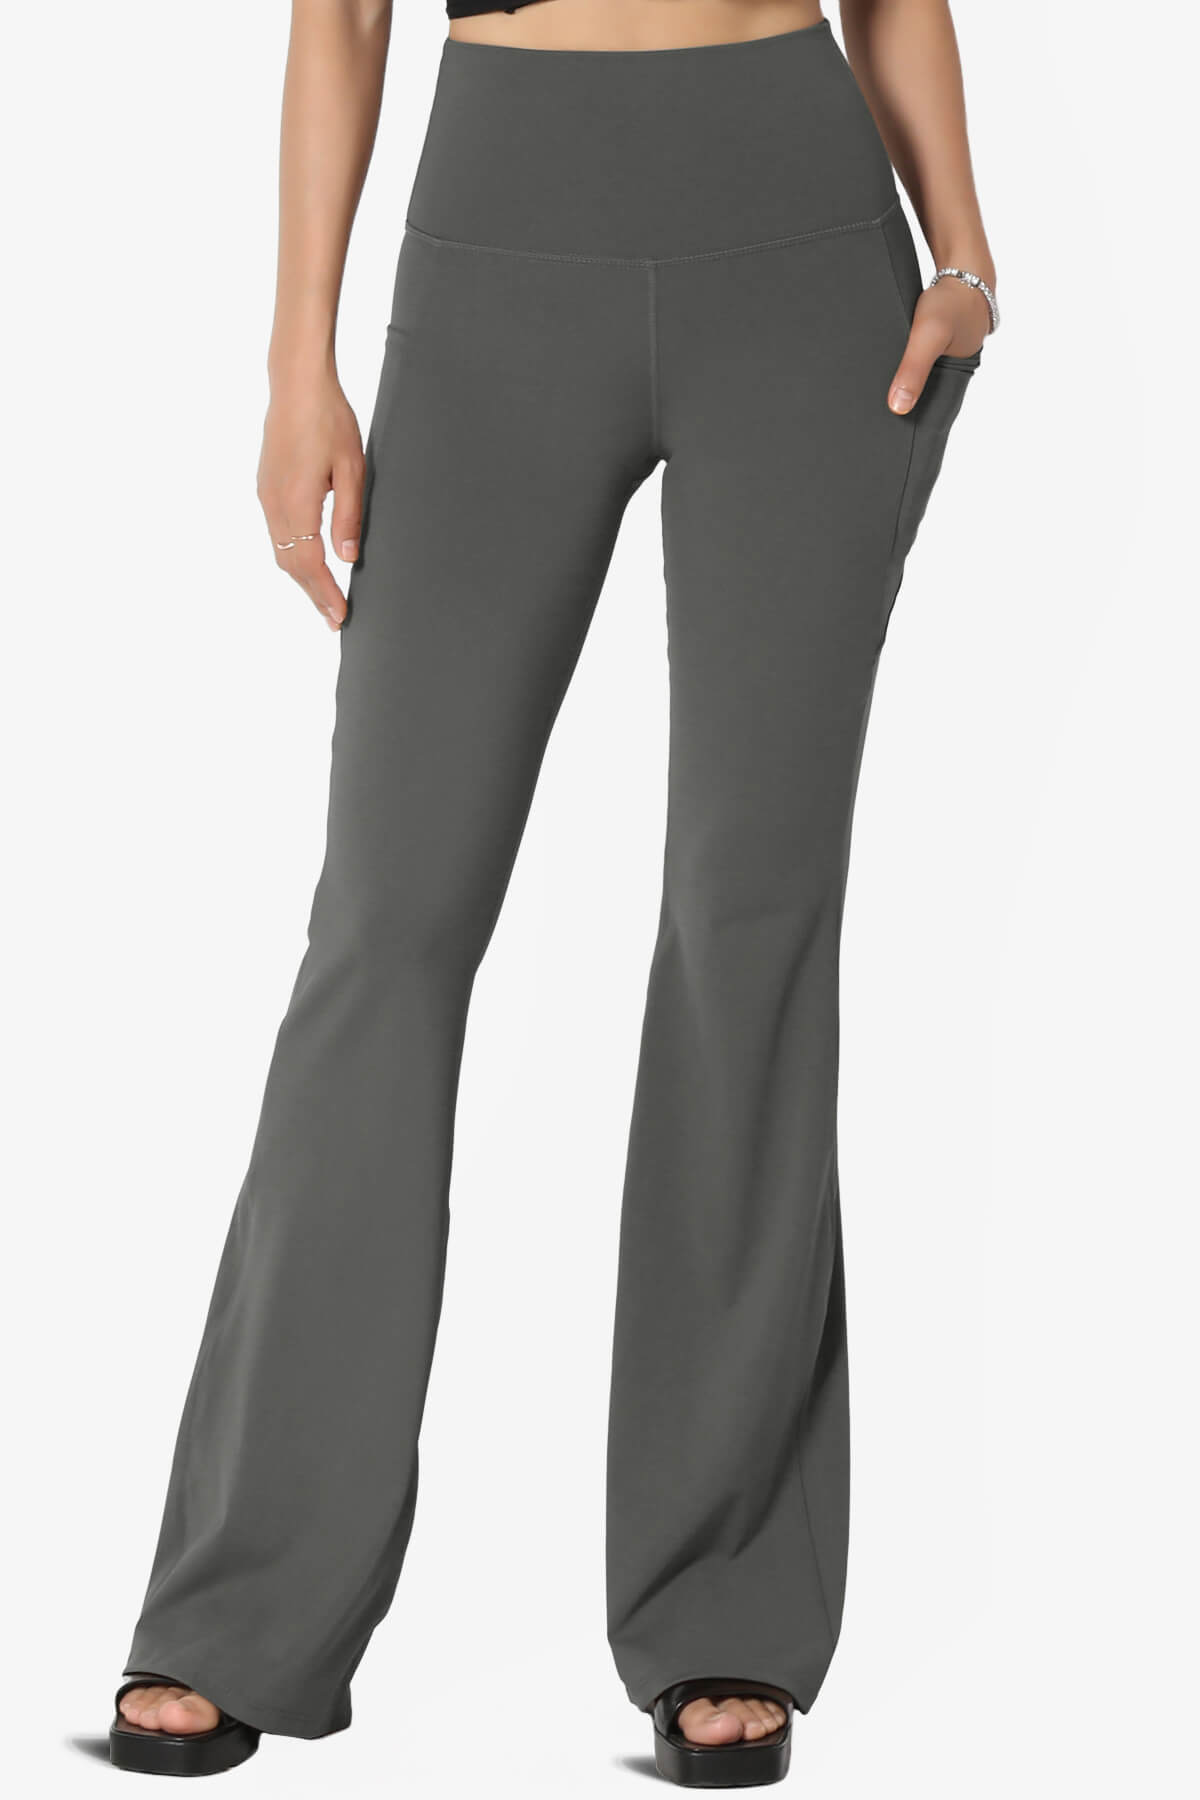 Load image into Gallery viewer, Gemma Athletic Pocket Flare Yoga Pants ASH GREY_1
